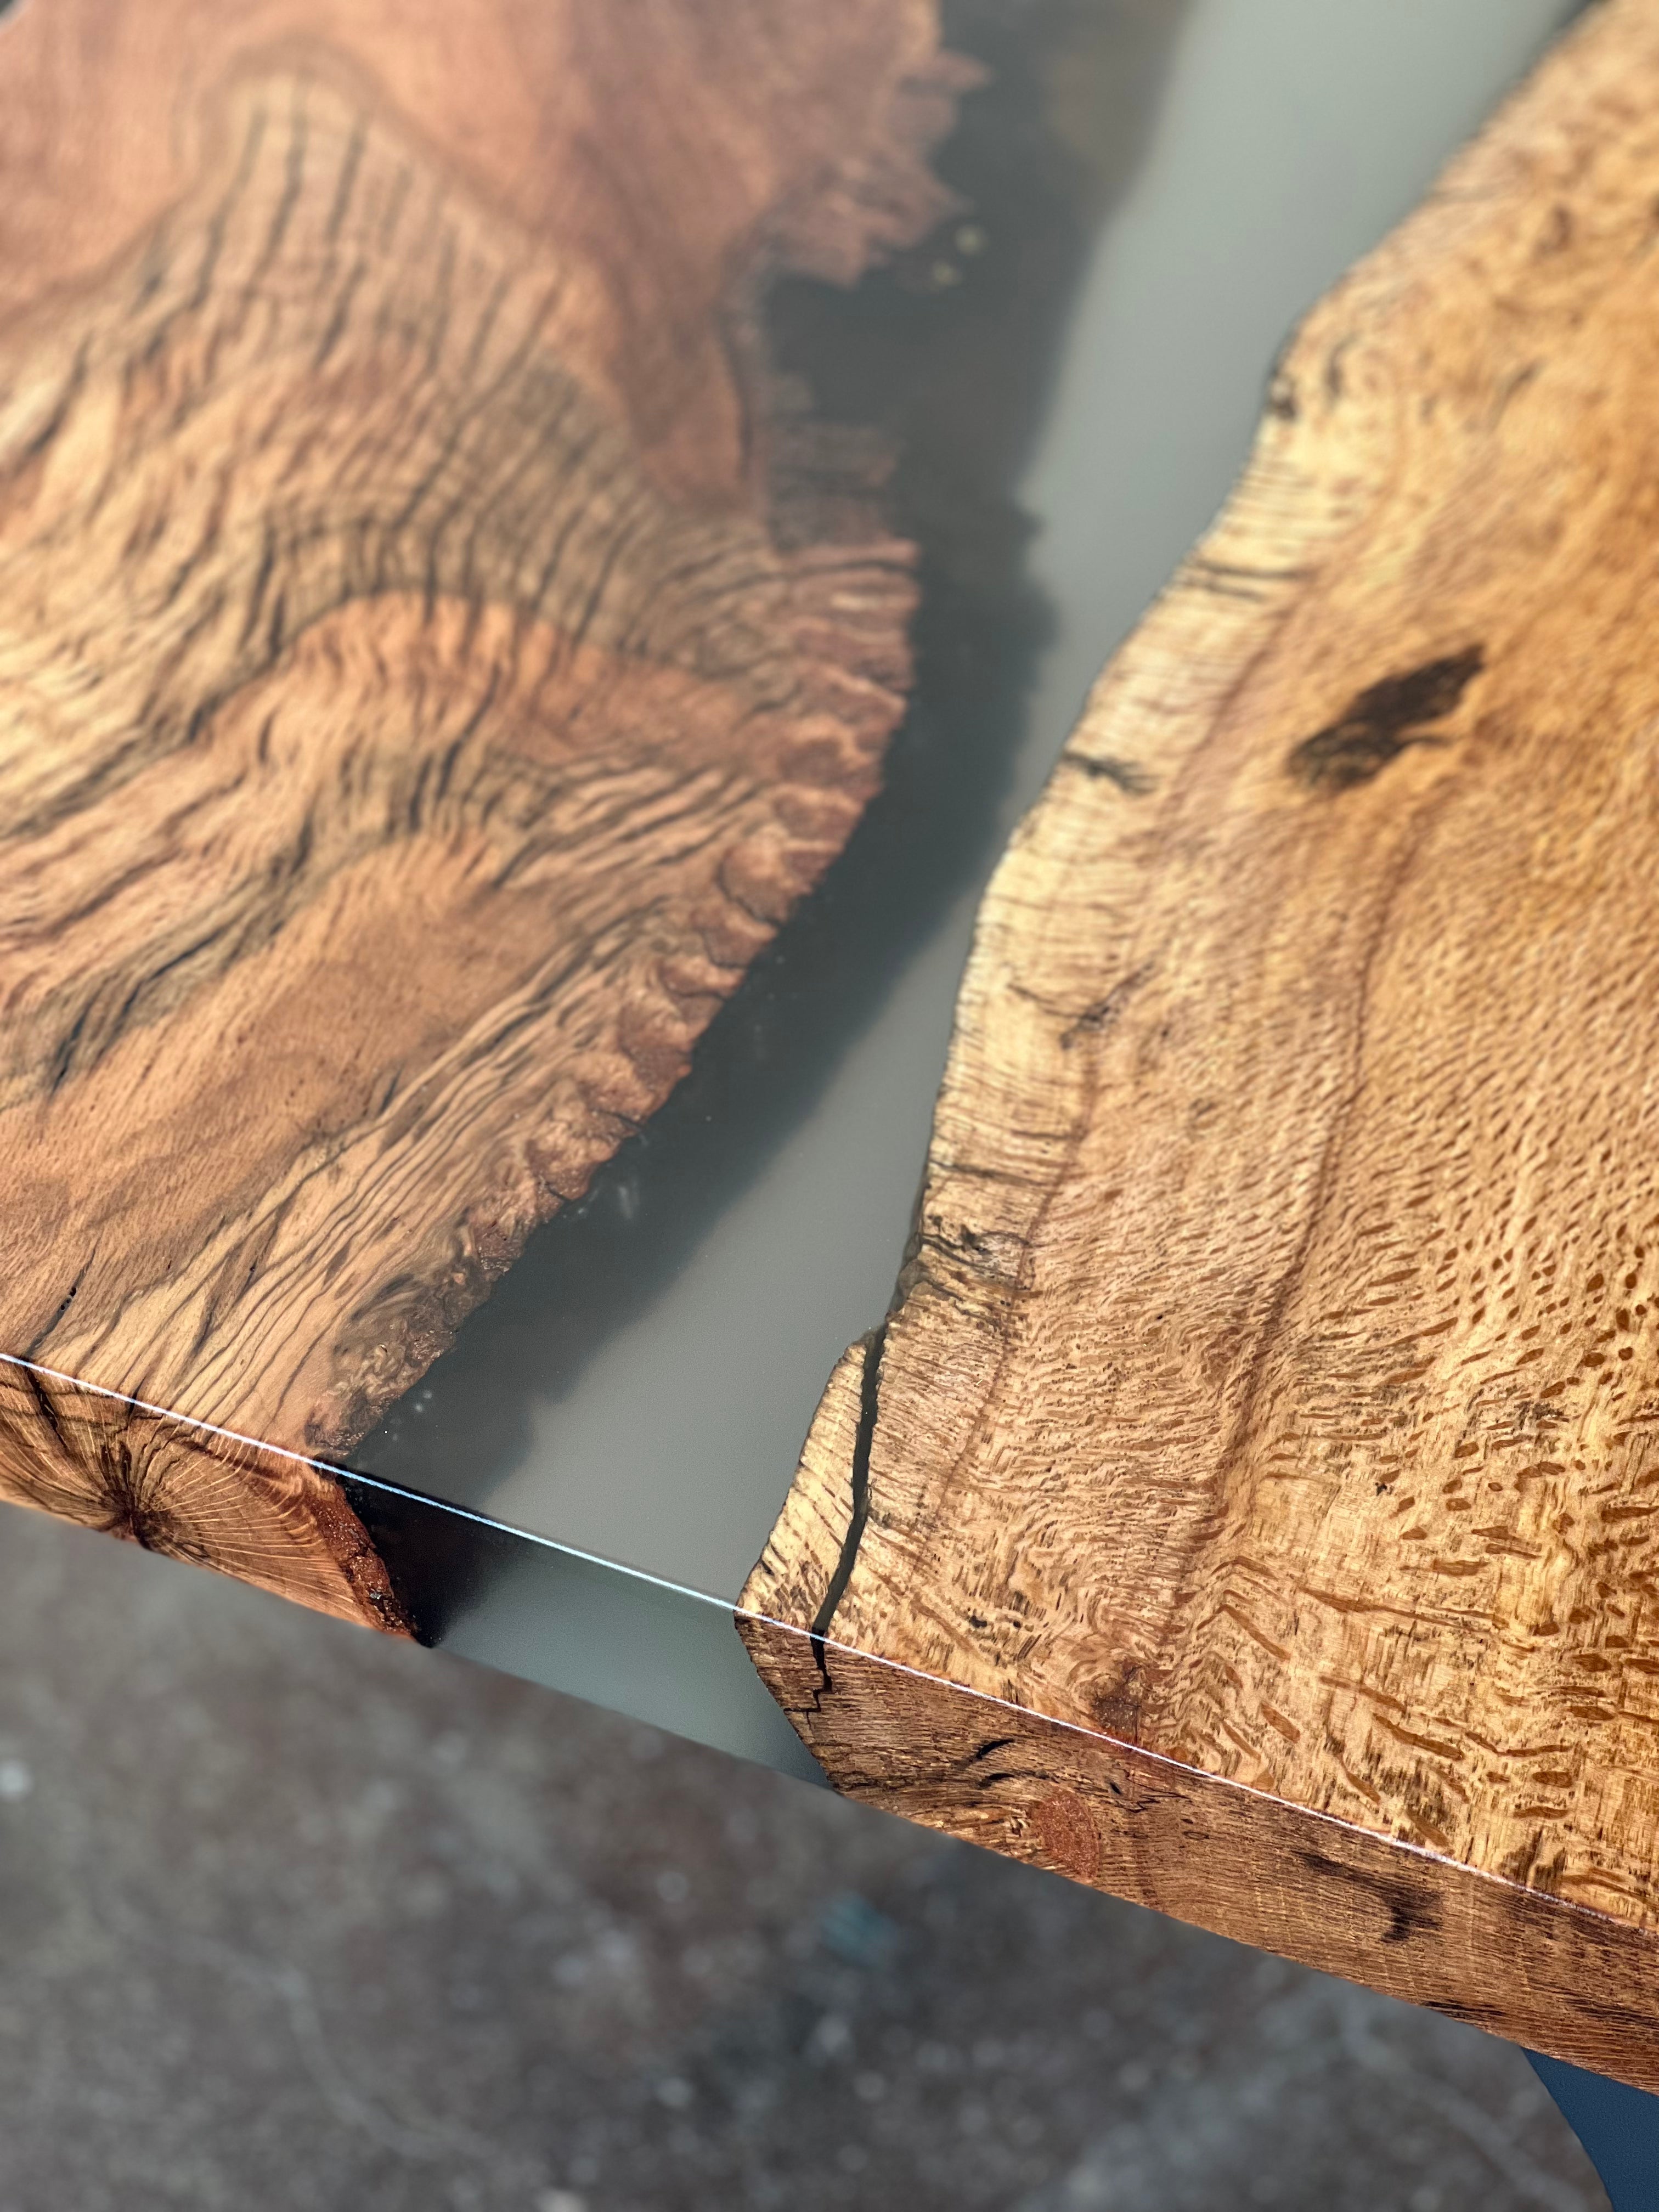 Get your custom made Live edge coffee tables in San Diego